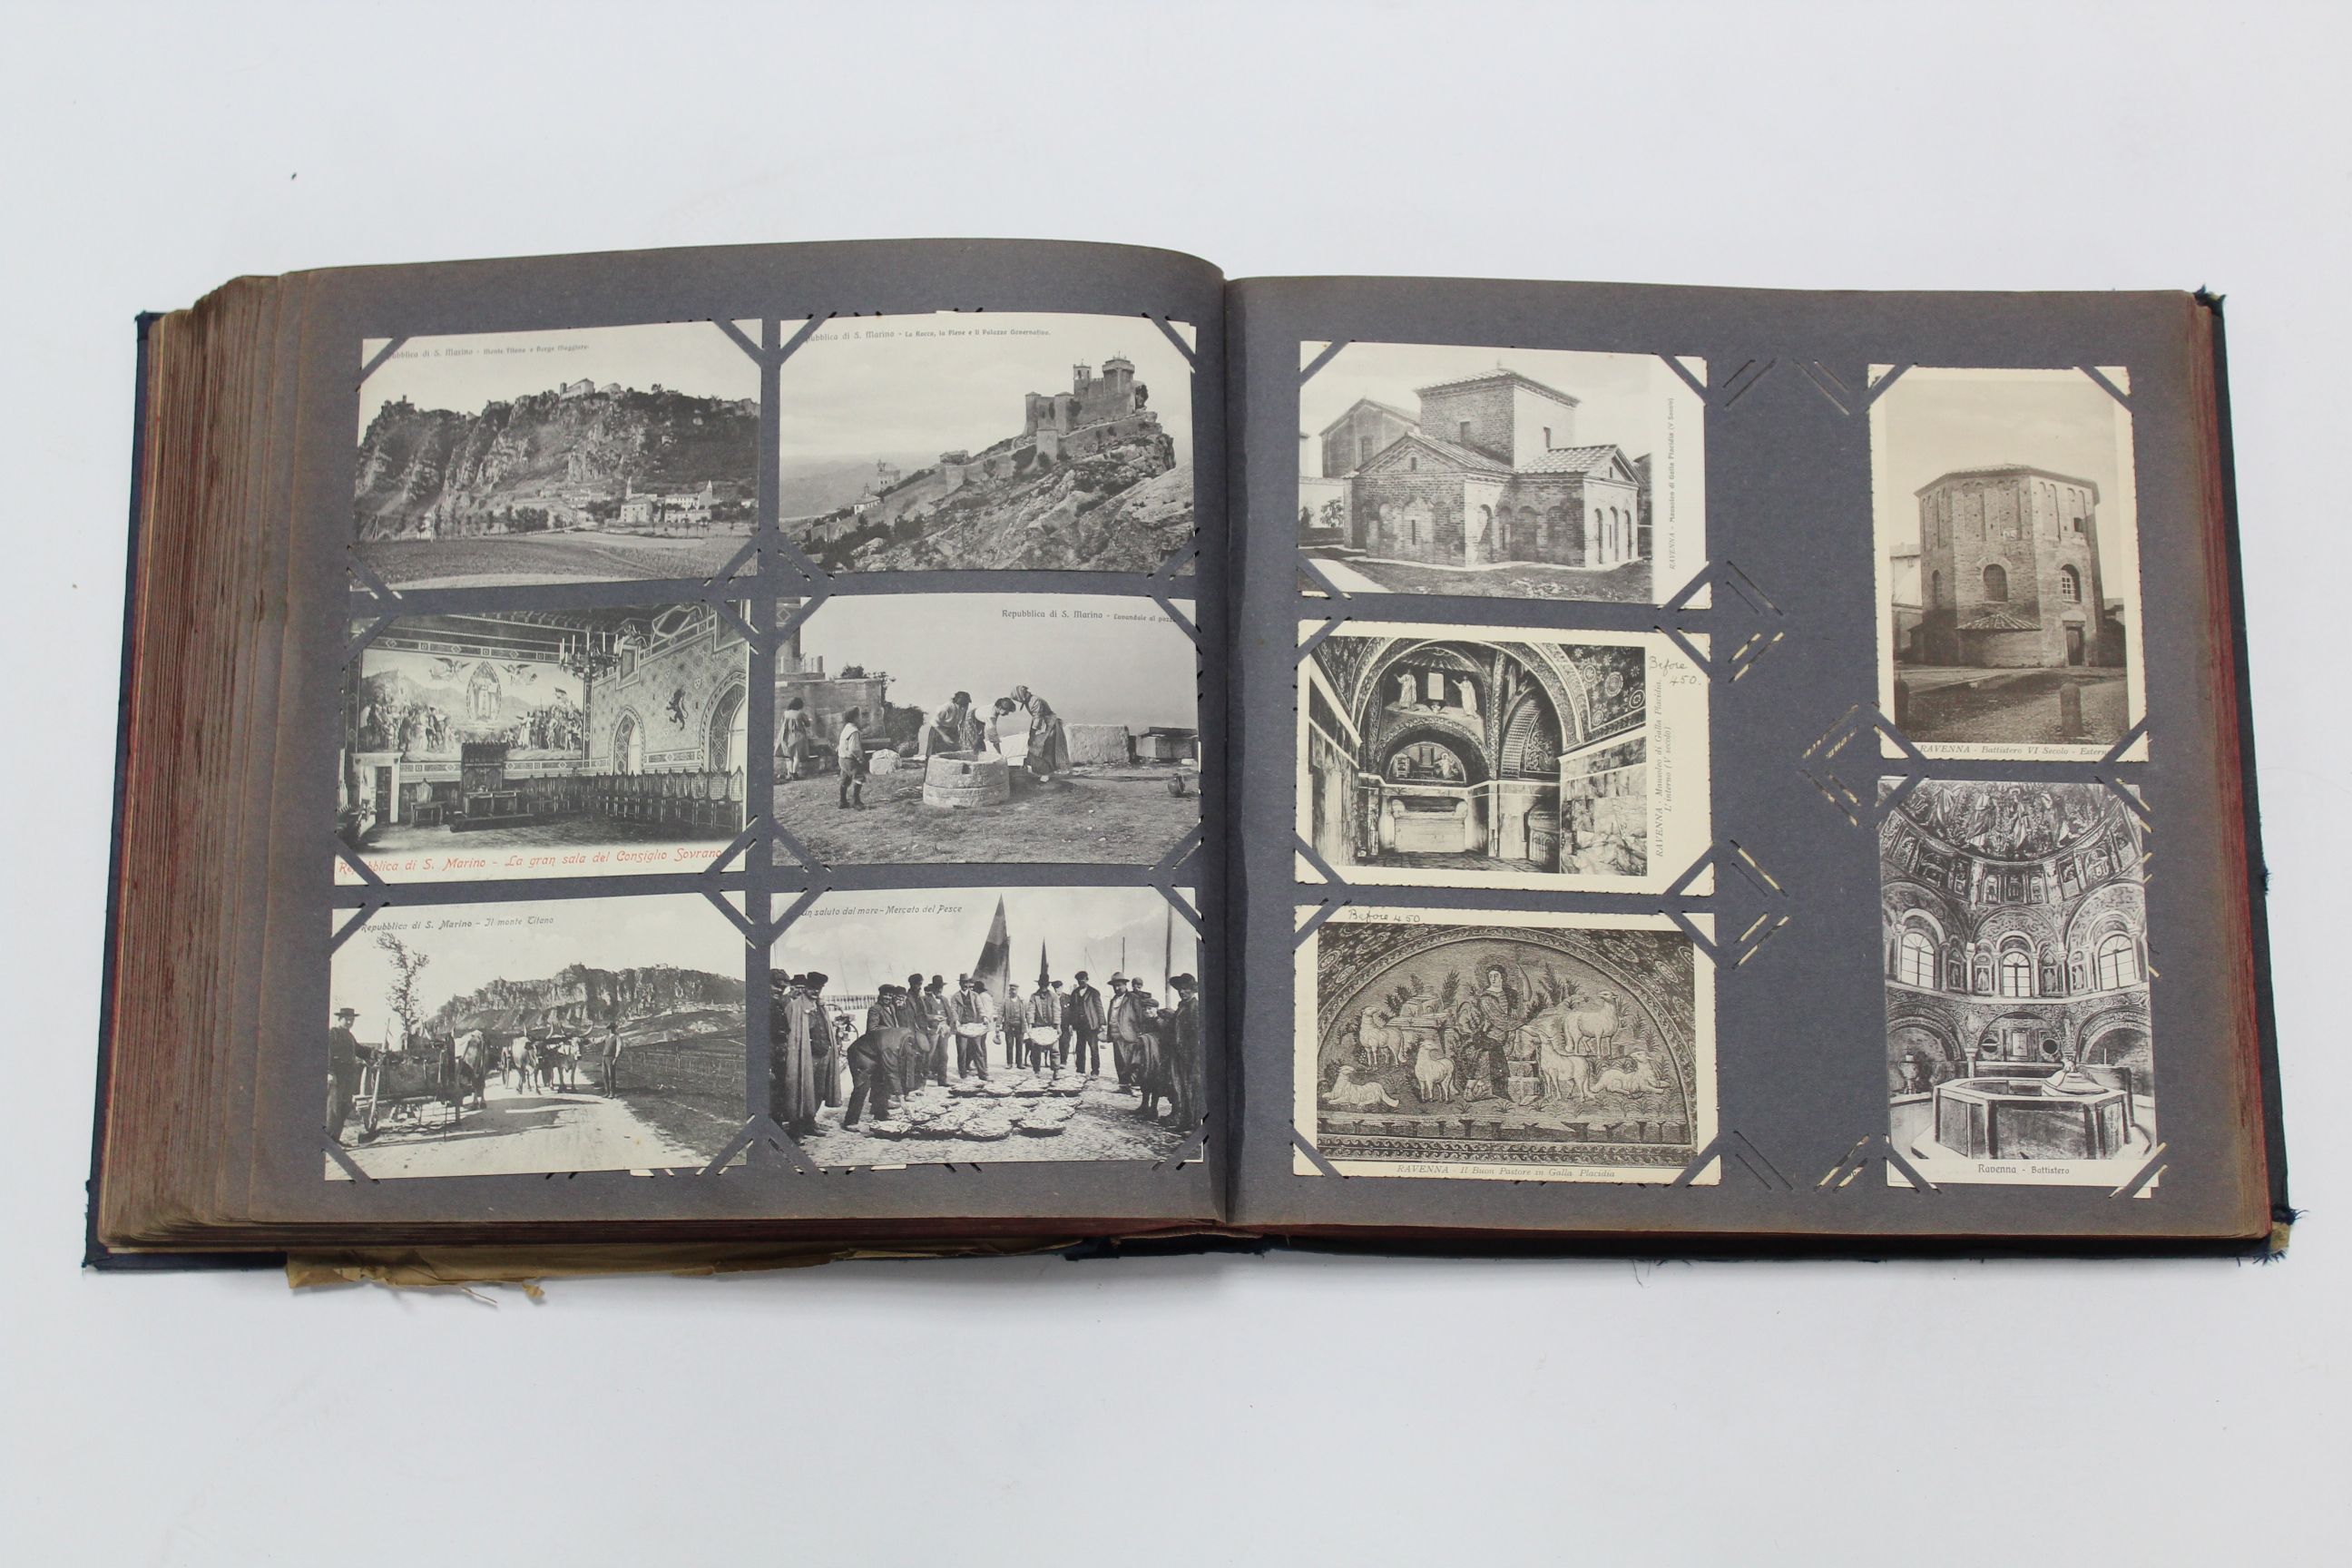 AN ALBUM OF APPROXIMATELY SIX HUNDRED POSTCARDS, EARLY 20th century, RELIGIOUS FIGURES AND - Image 3 of 4